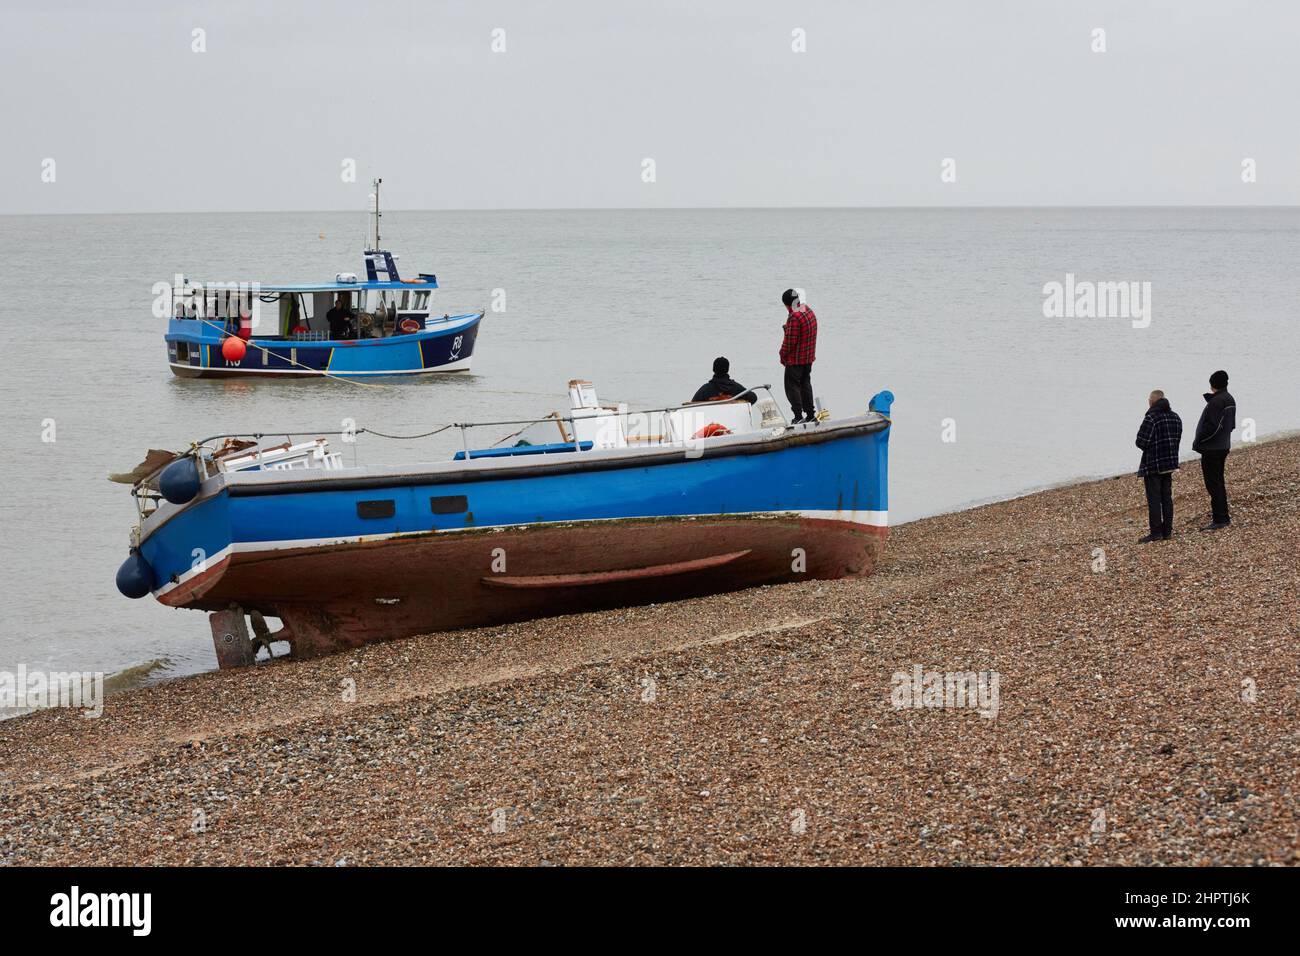 Herne Bay, Kent, UK. 23rd February 2022. UK Weather. A fishing boat beached at Herne Bay in Kent is attempted to be refloated. The boat is believed to have broken it's moorings in Essex and been blown over by strong winds from Storm Franklin on Monday. The attempt to refloat failed. Credit: Alan Payton/Alamy Live News. Stock Photo